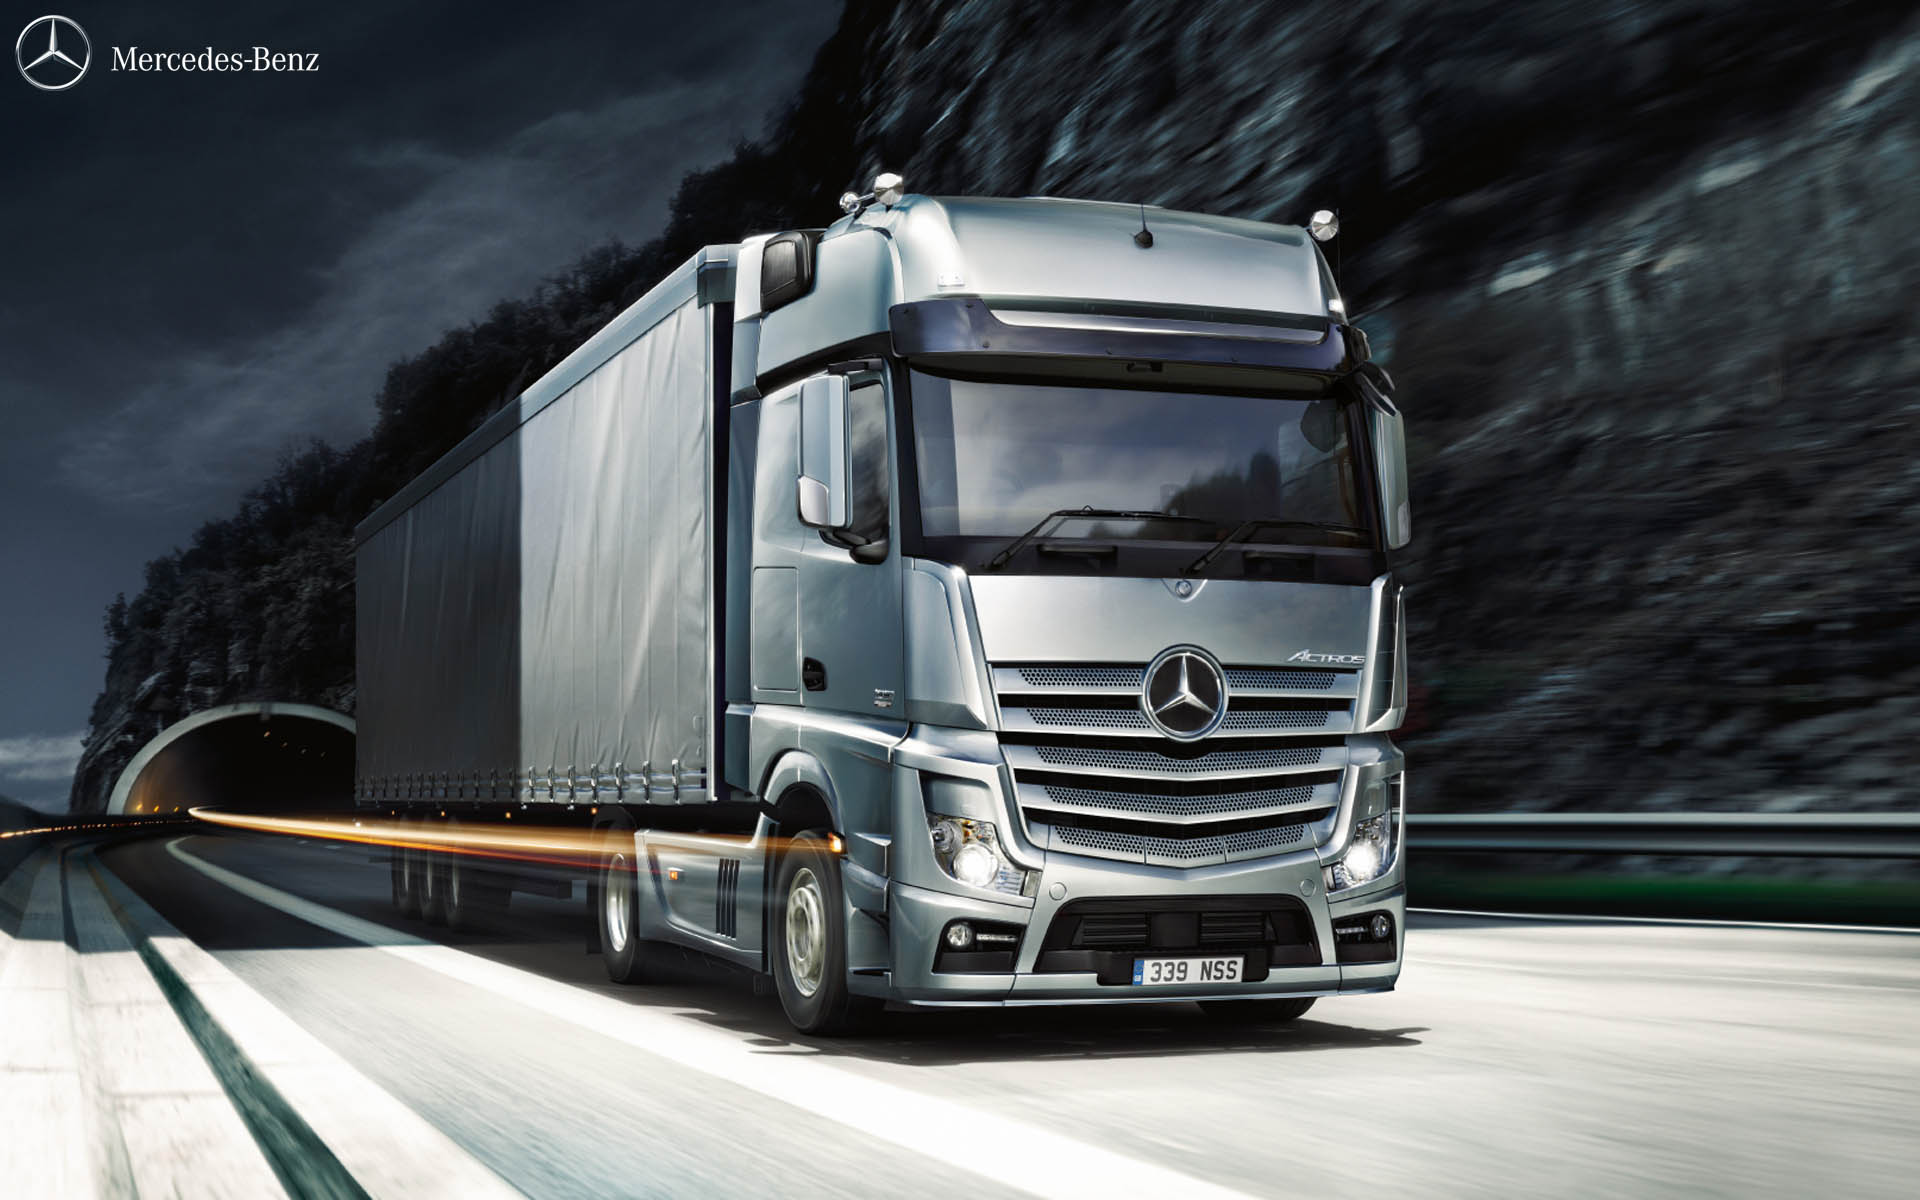 The two air filter carriers will be installed in the Mercedes-Benz Actros starting early in 2017.